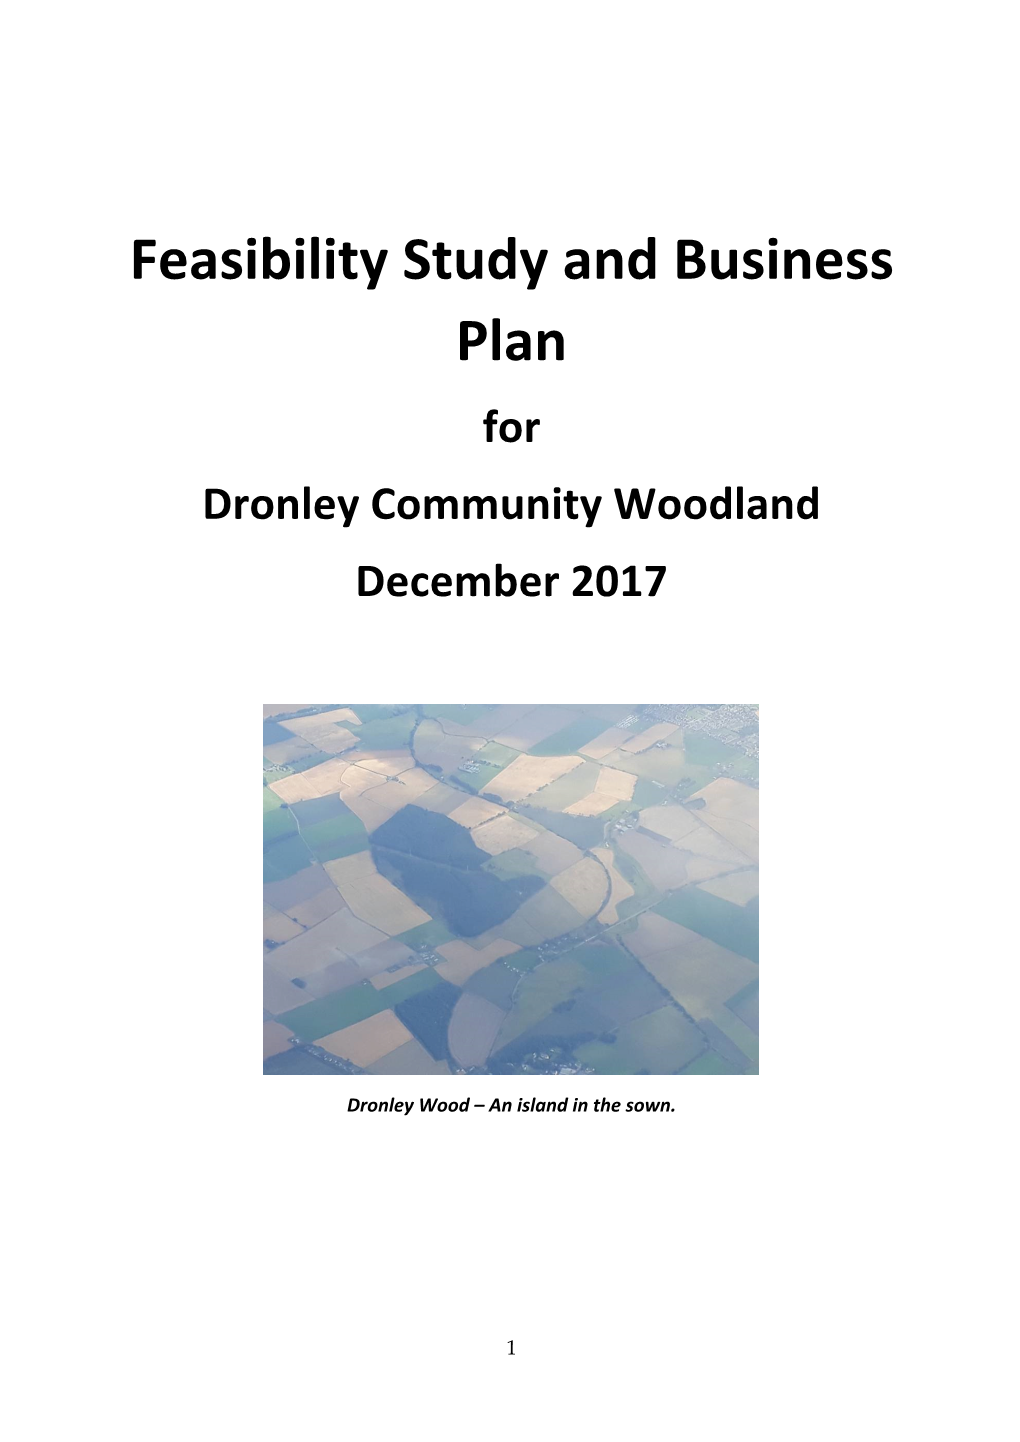 Feasibility Study and Business Plan for Dronley Community Woodland December 2017